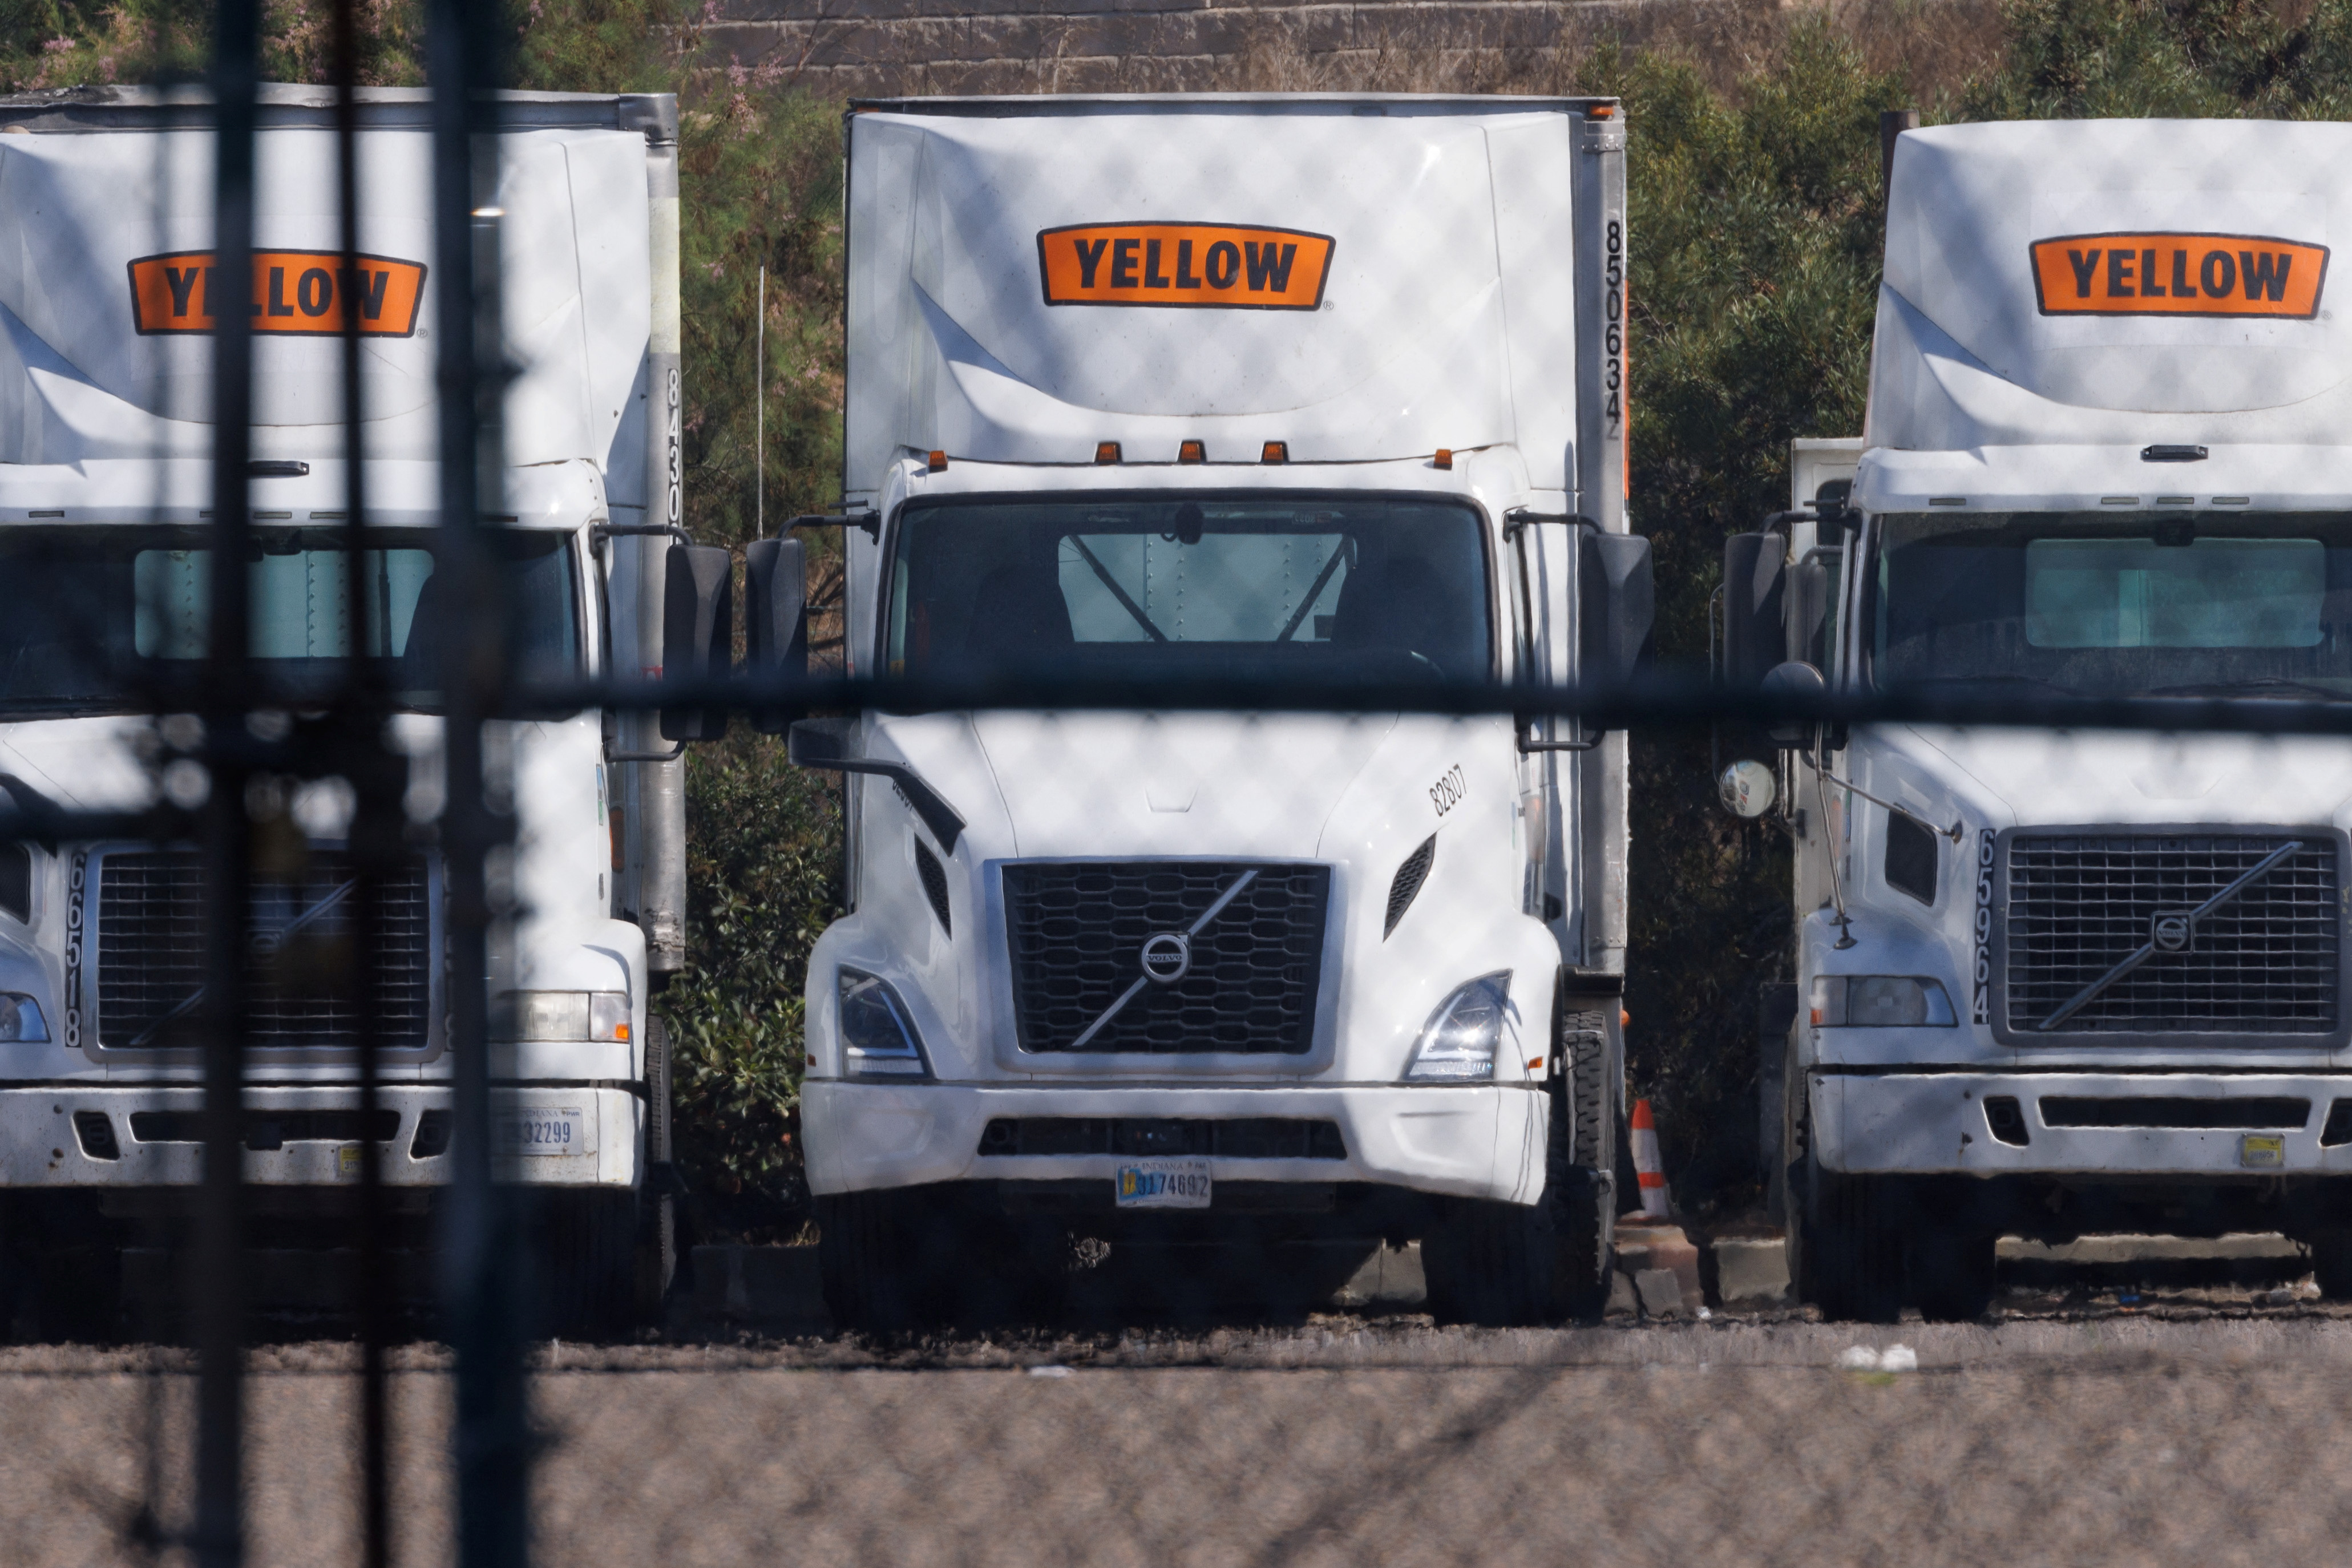 Freight trucking company Yellow files for bankruptcy